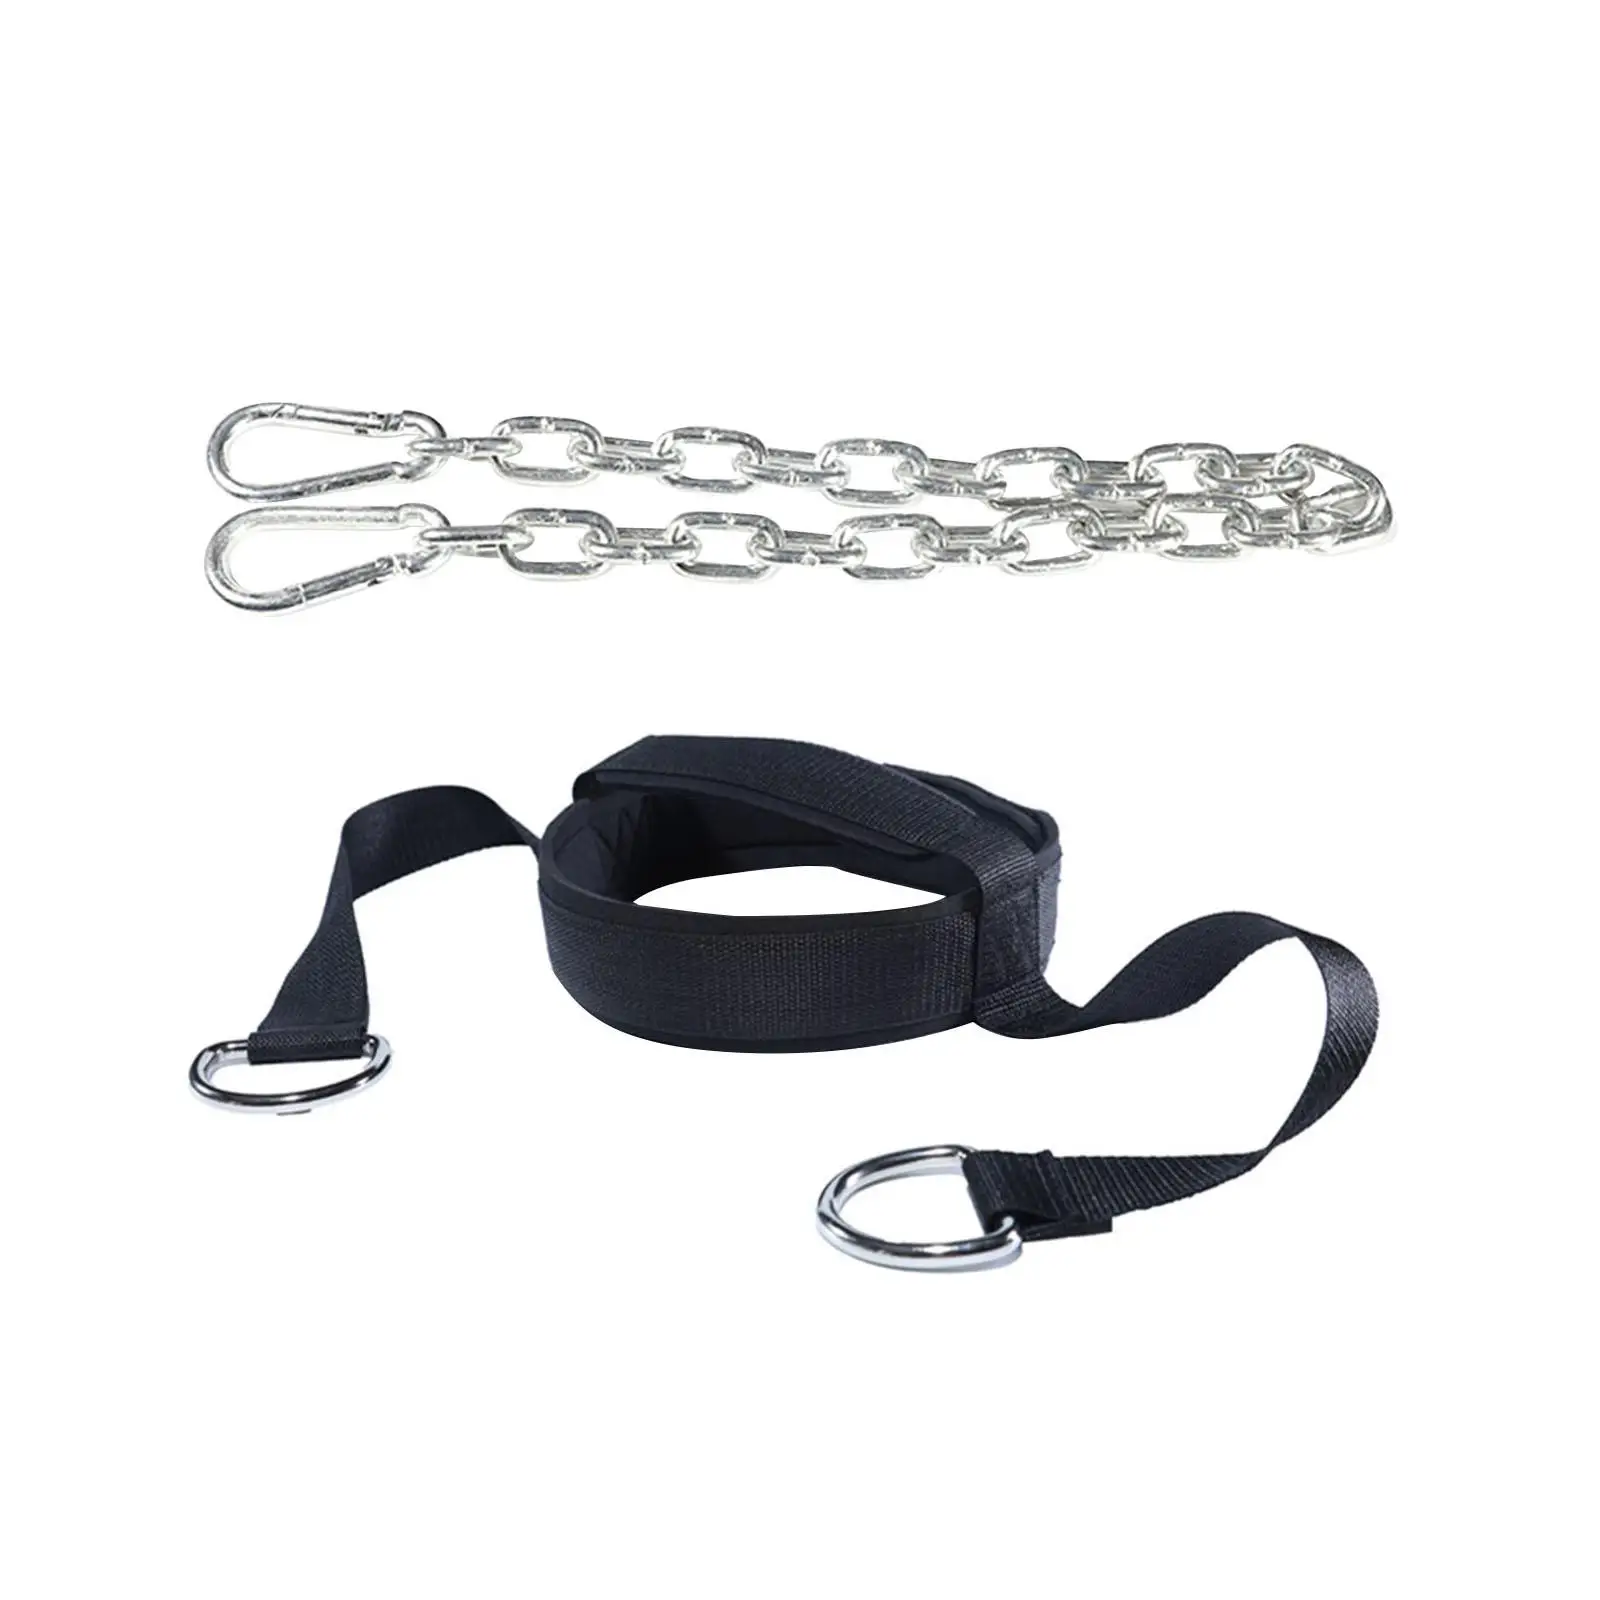 Neck Harness Adjustable Neck Exercise Equipment with Metal Chain Heavy Duty